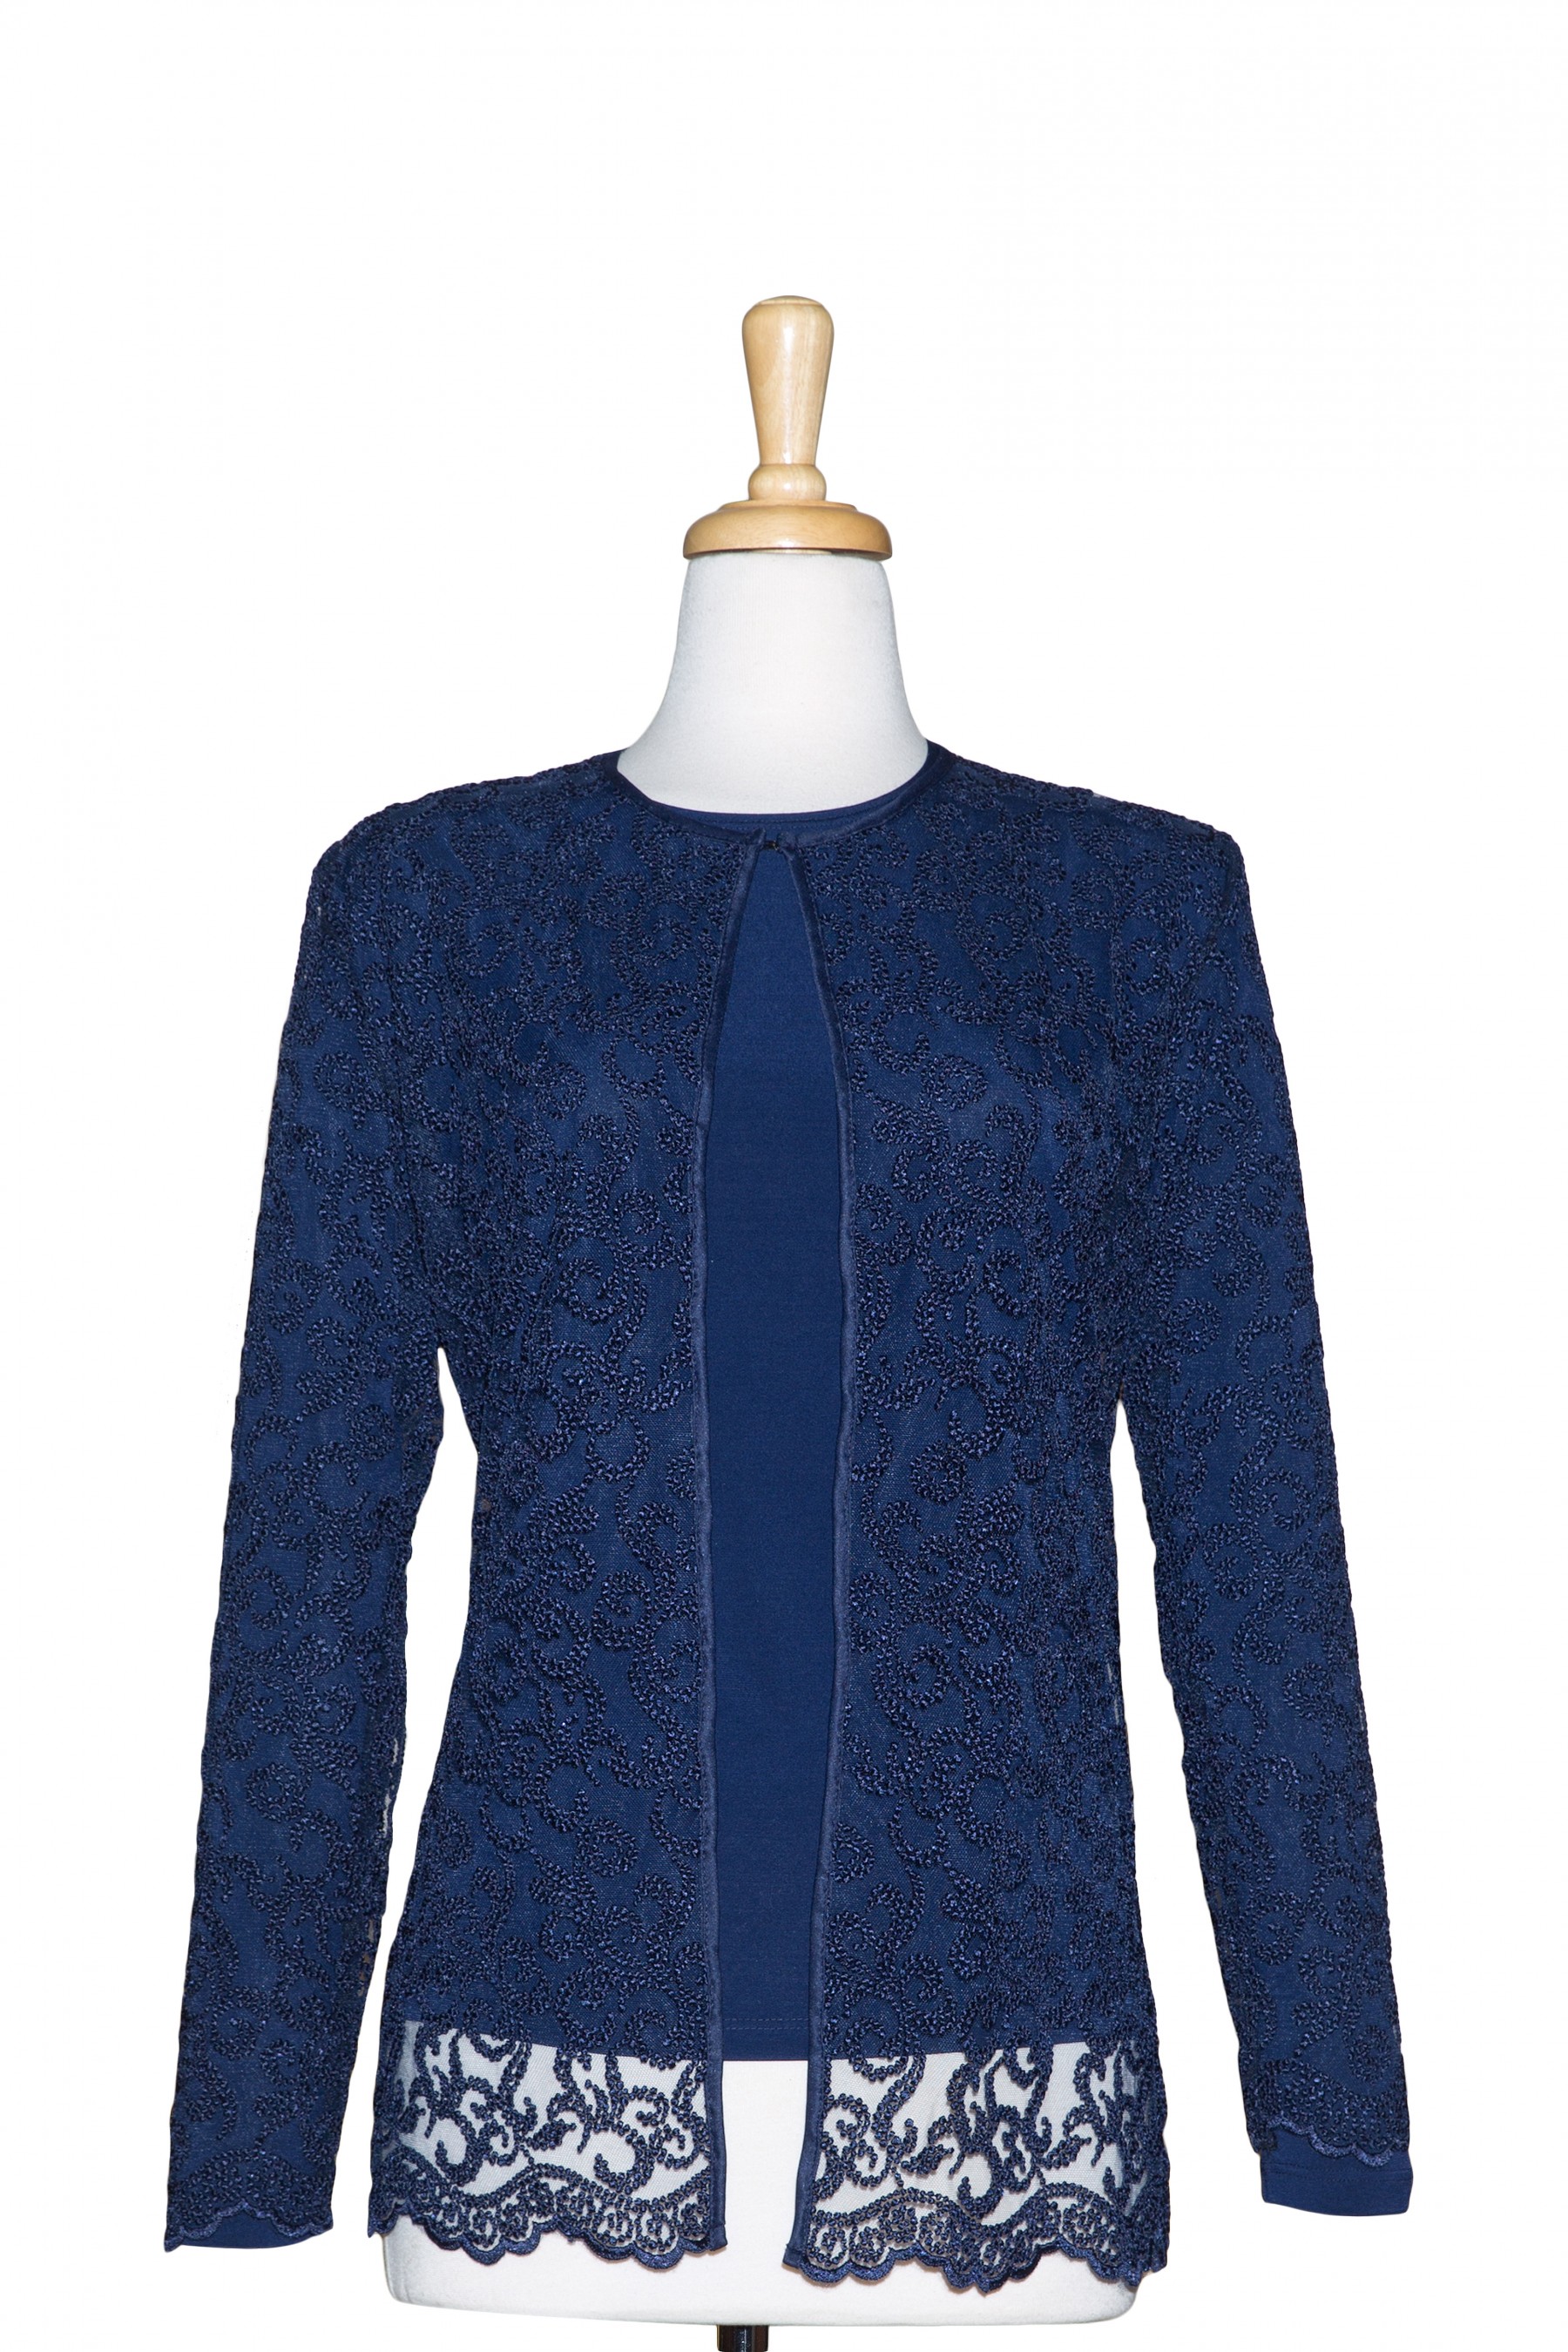 Two Piece Navy Embroidered Lace with Long Sleeve Top